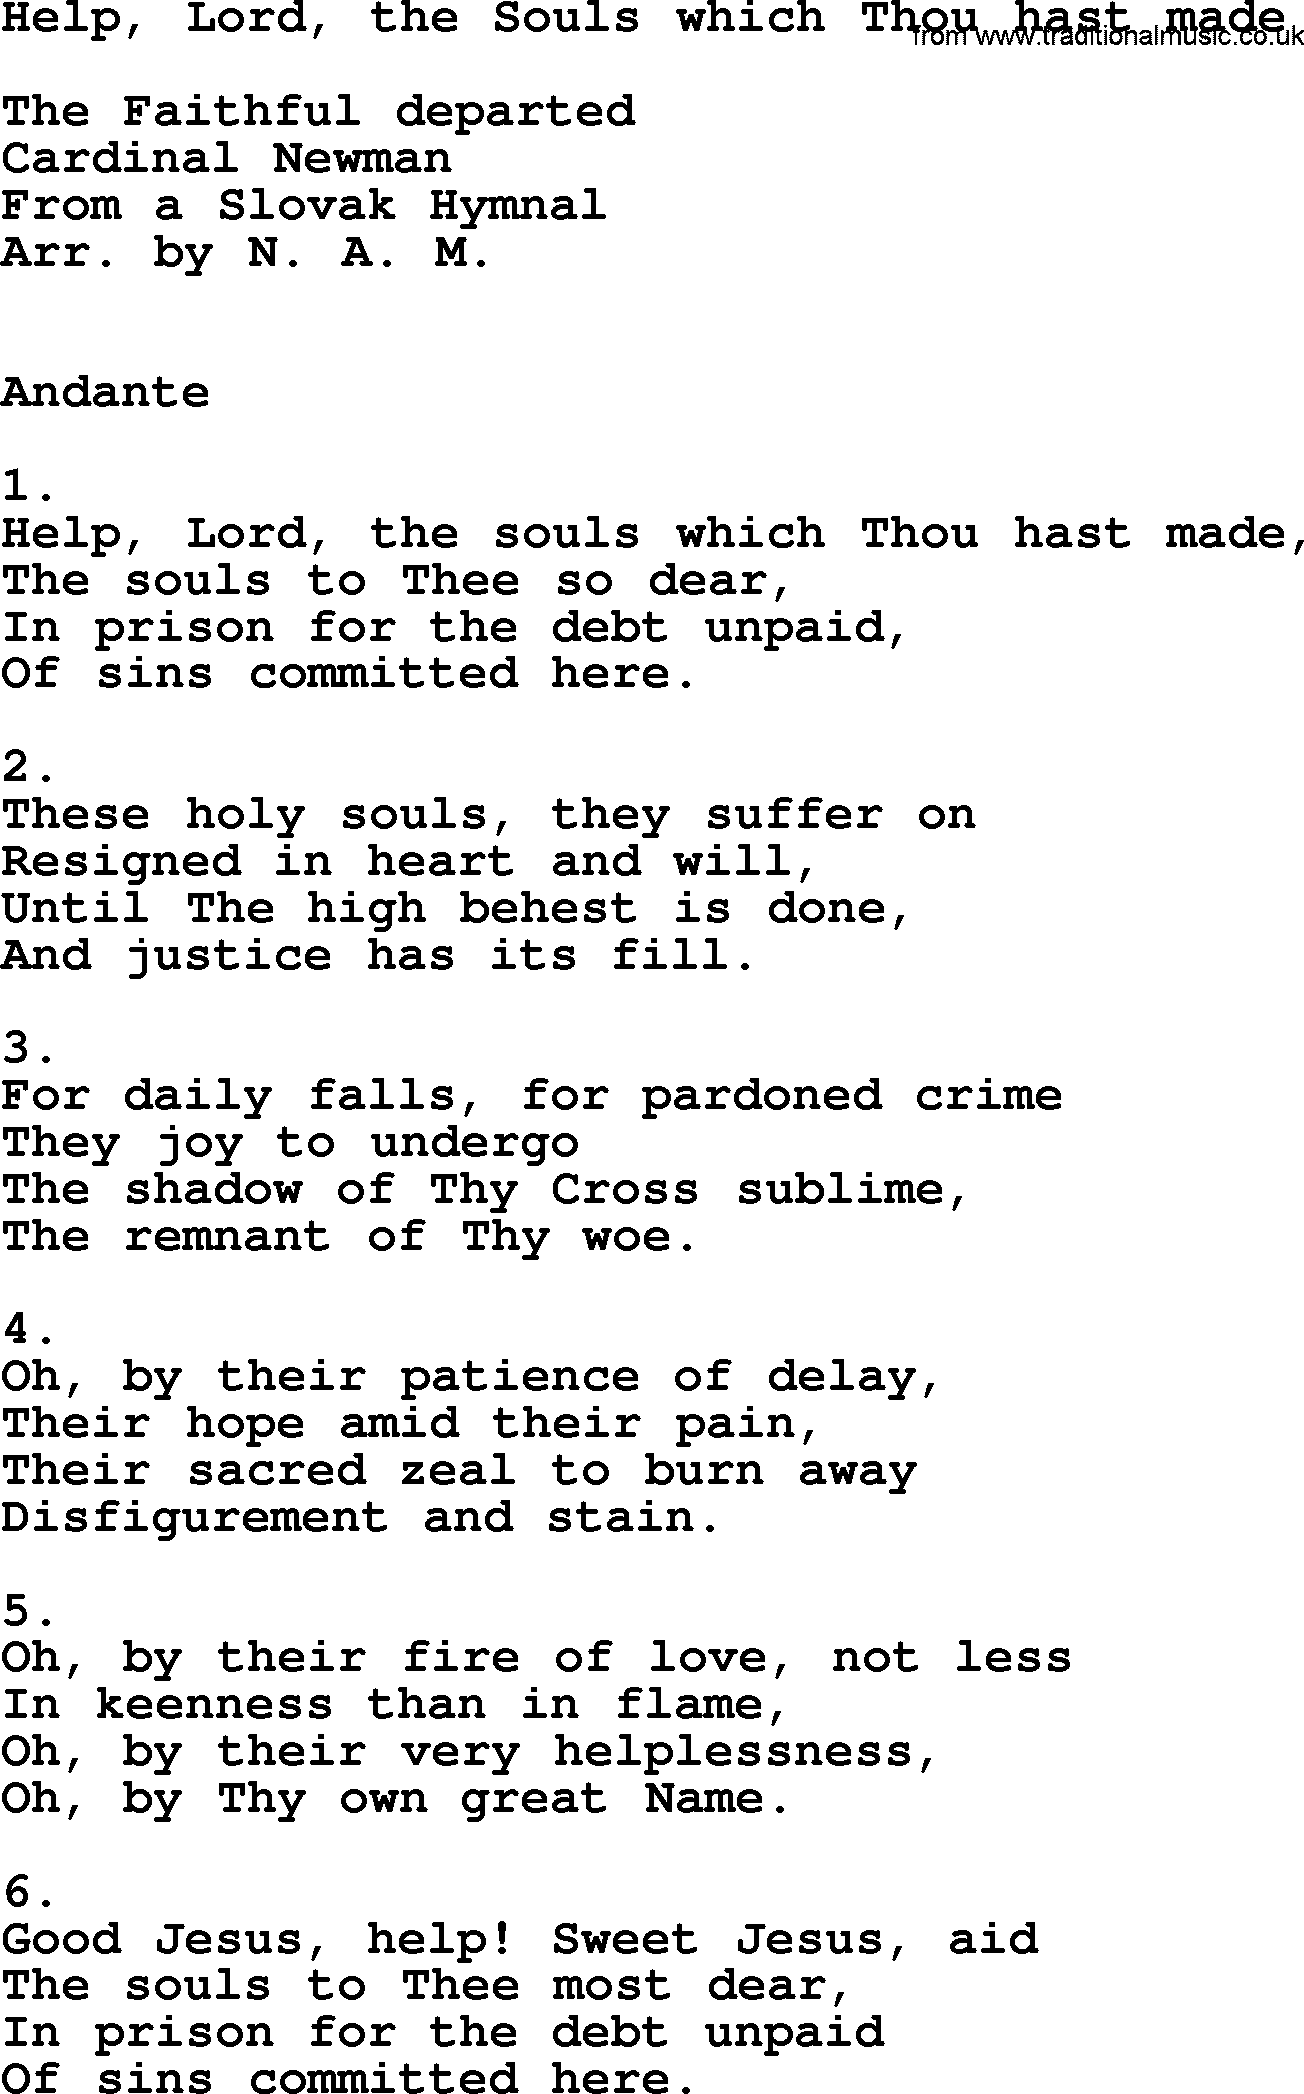 Catholic Hymn: Help, Lord, The Souls Which Thou Hast Made lyrics with PDF